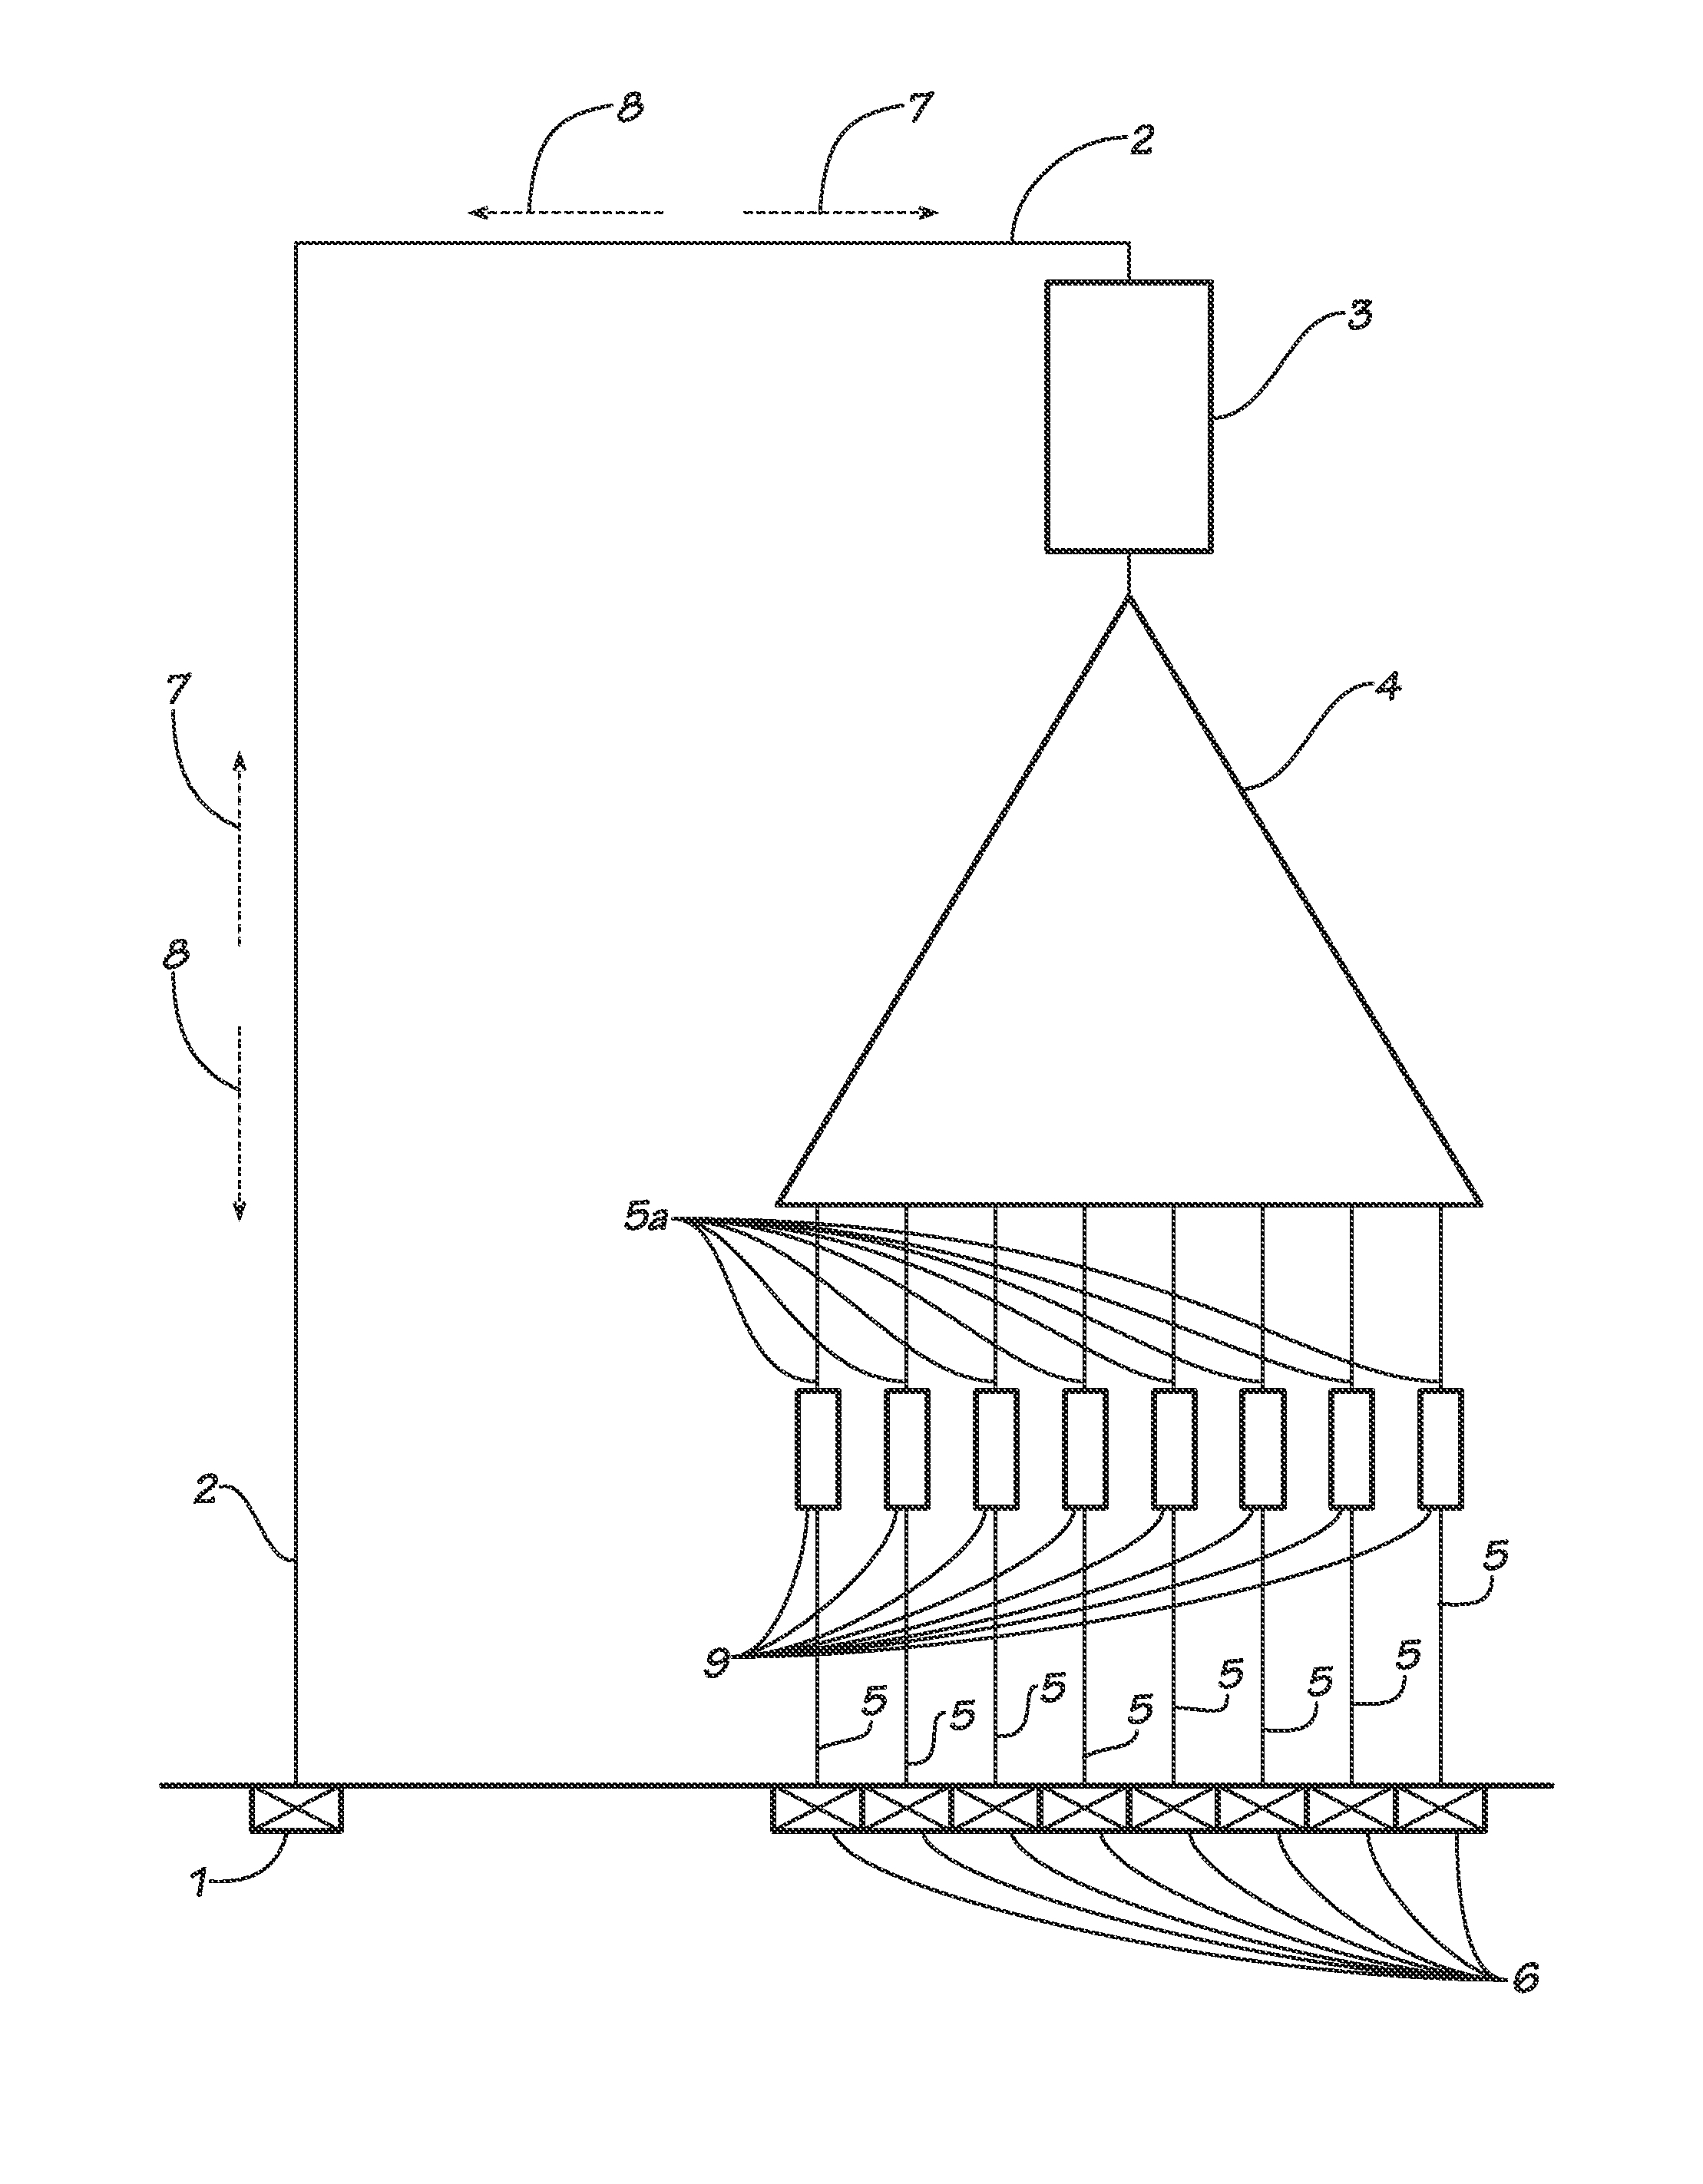 Multi- purpose apparatus for switching, amplifying, replicating, and monitoring optical signals on a multiplicity of optical fibers